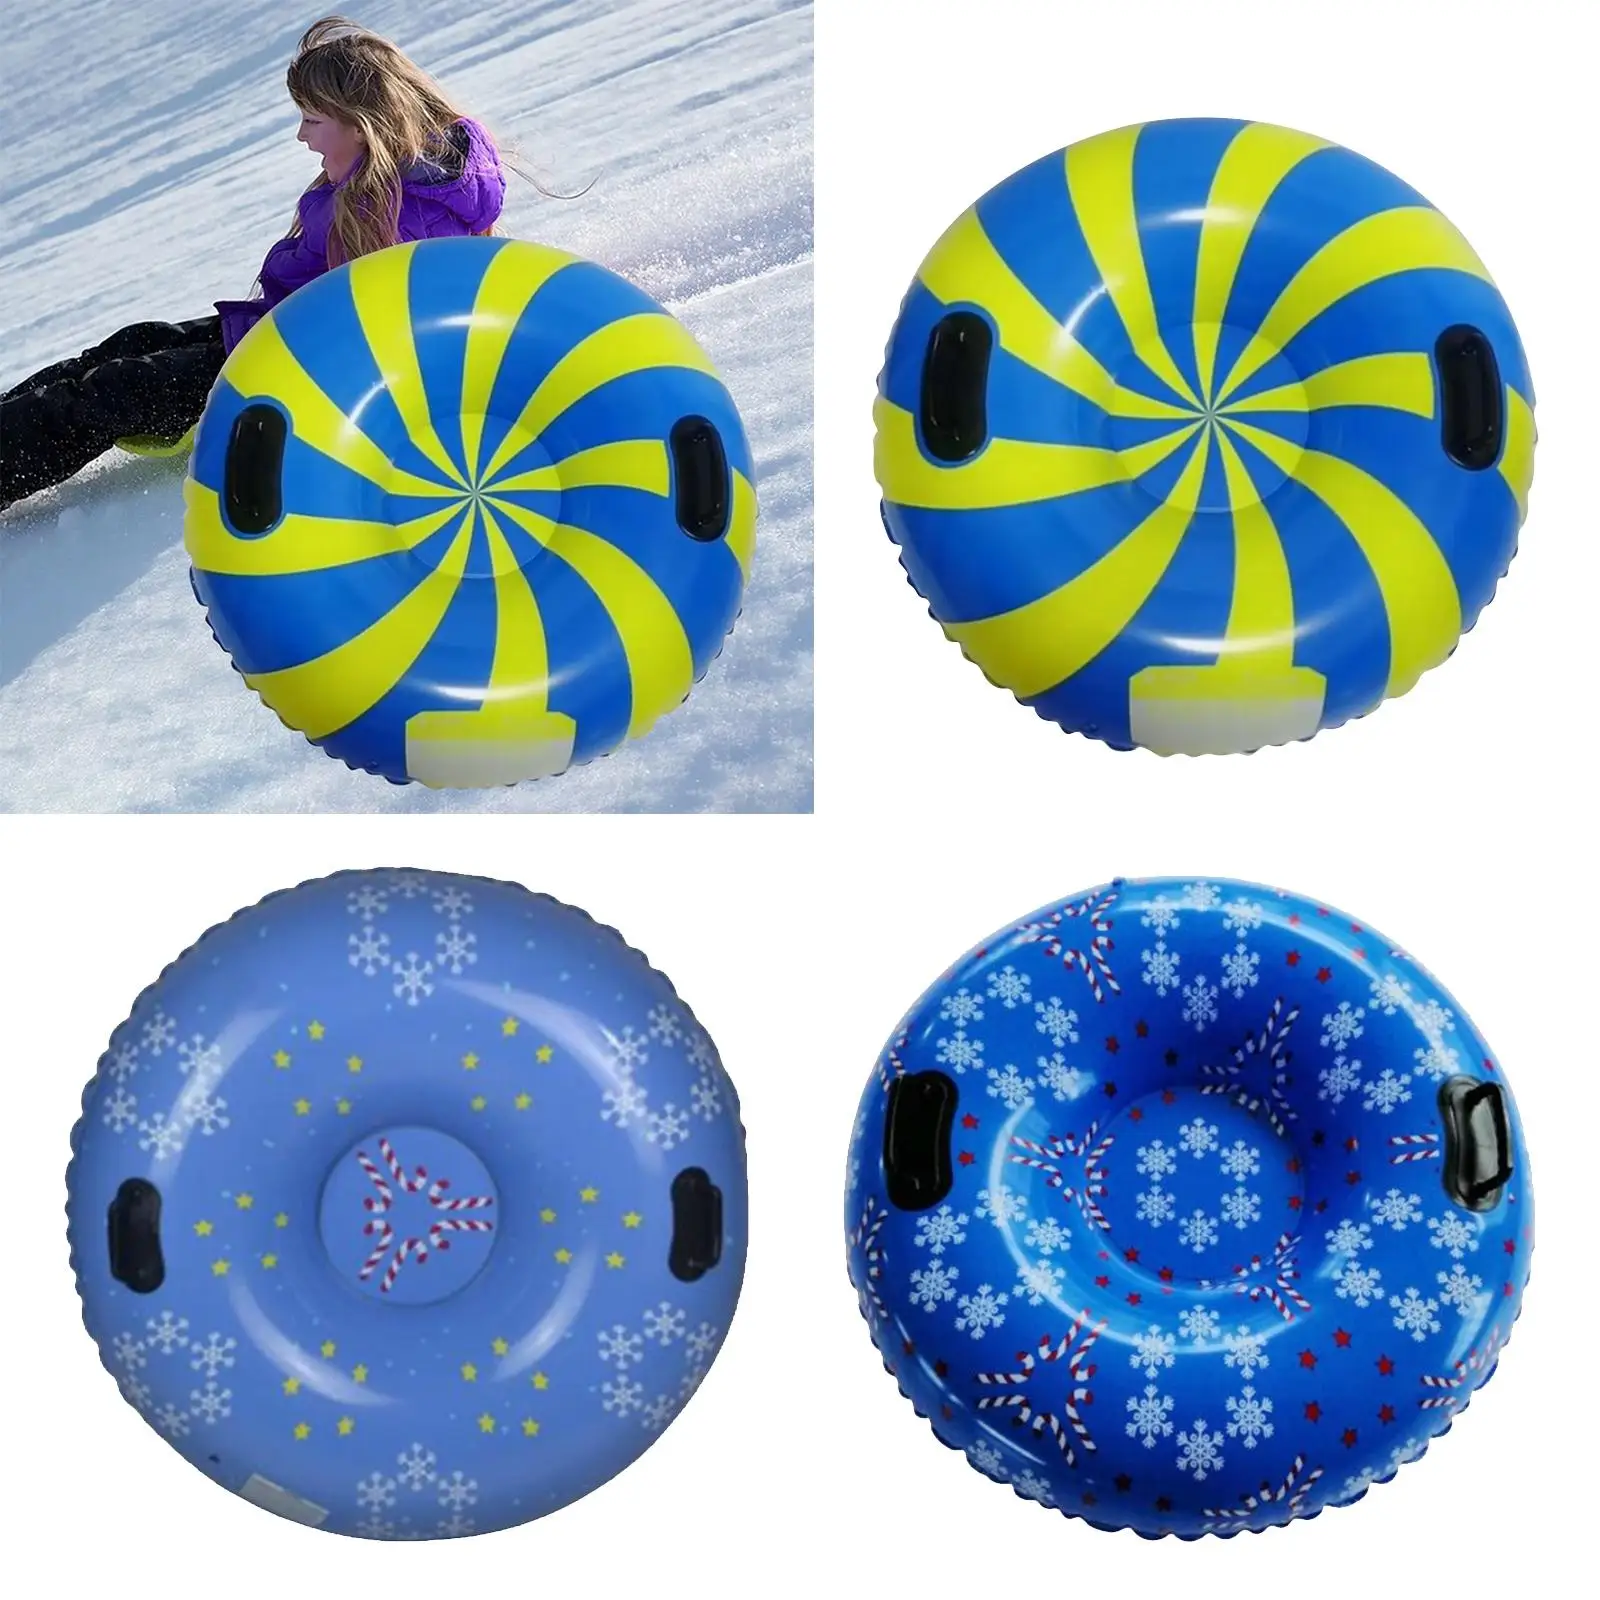 Snow Tube Sled for Kids and Adults, Snow Sleds Heavy Duty with Handles, Big Inflatable Snow Tubes for Outdoor Sledding